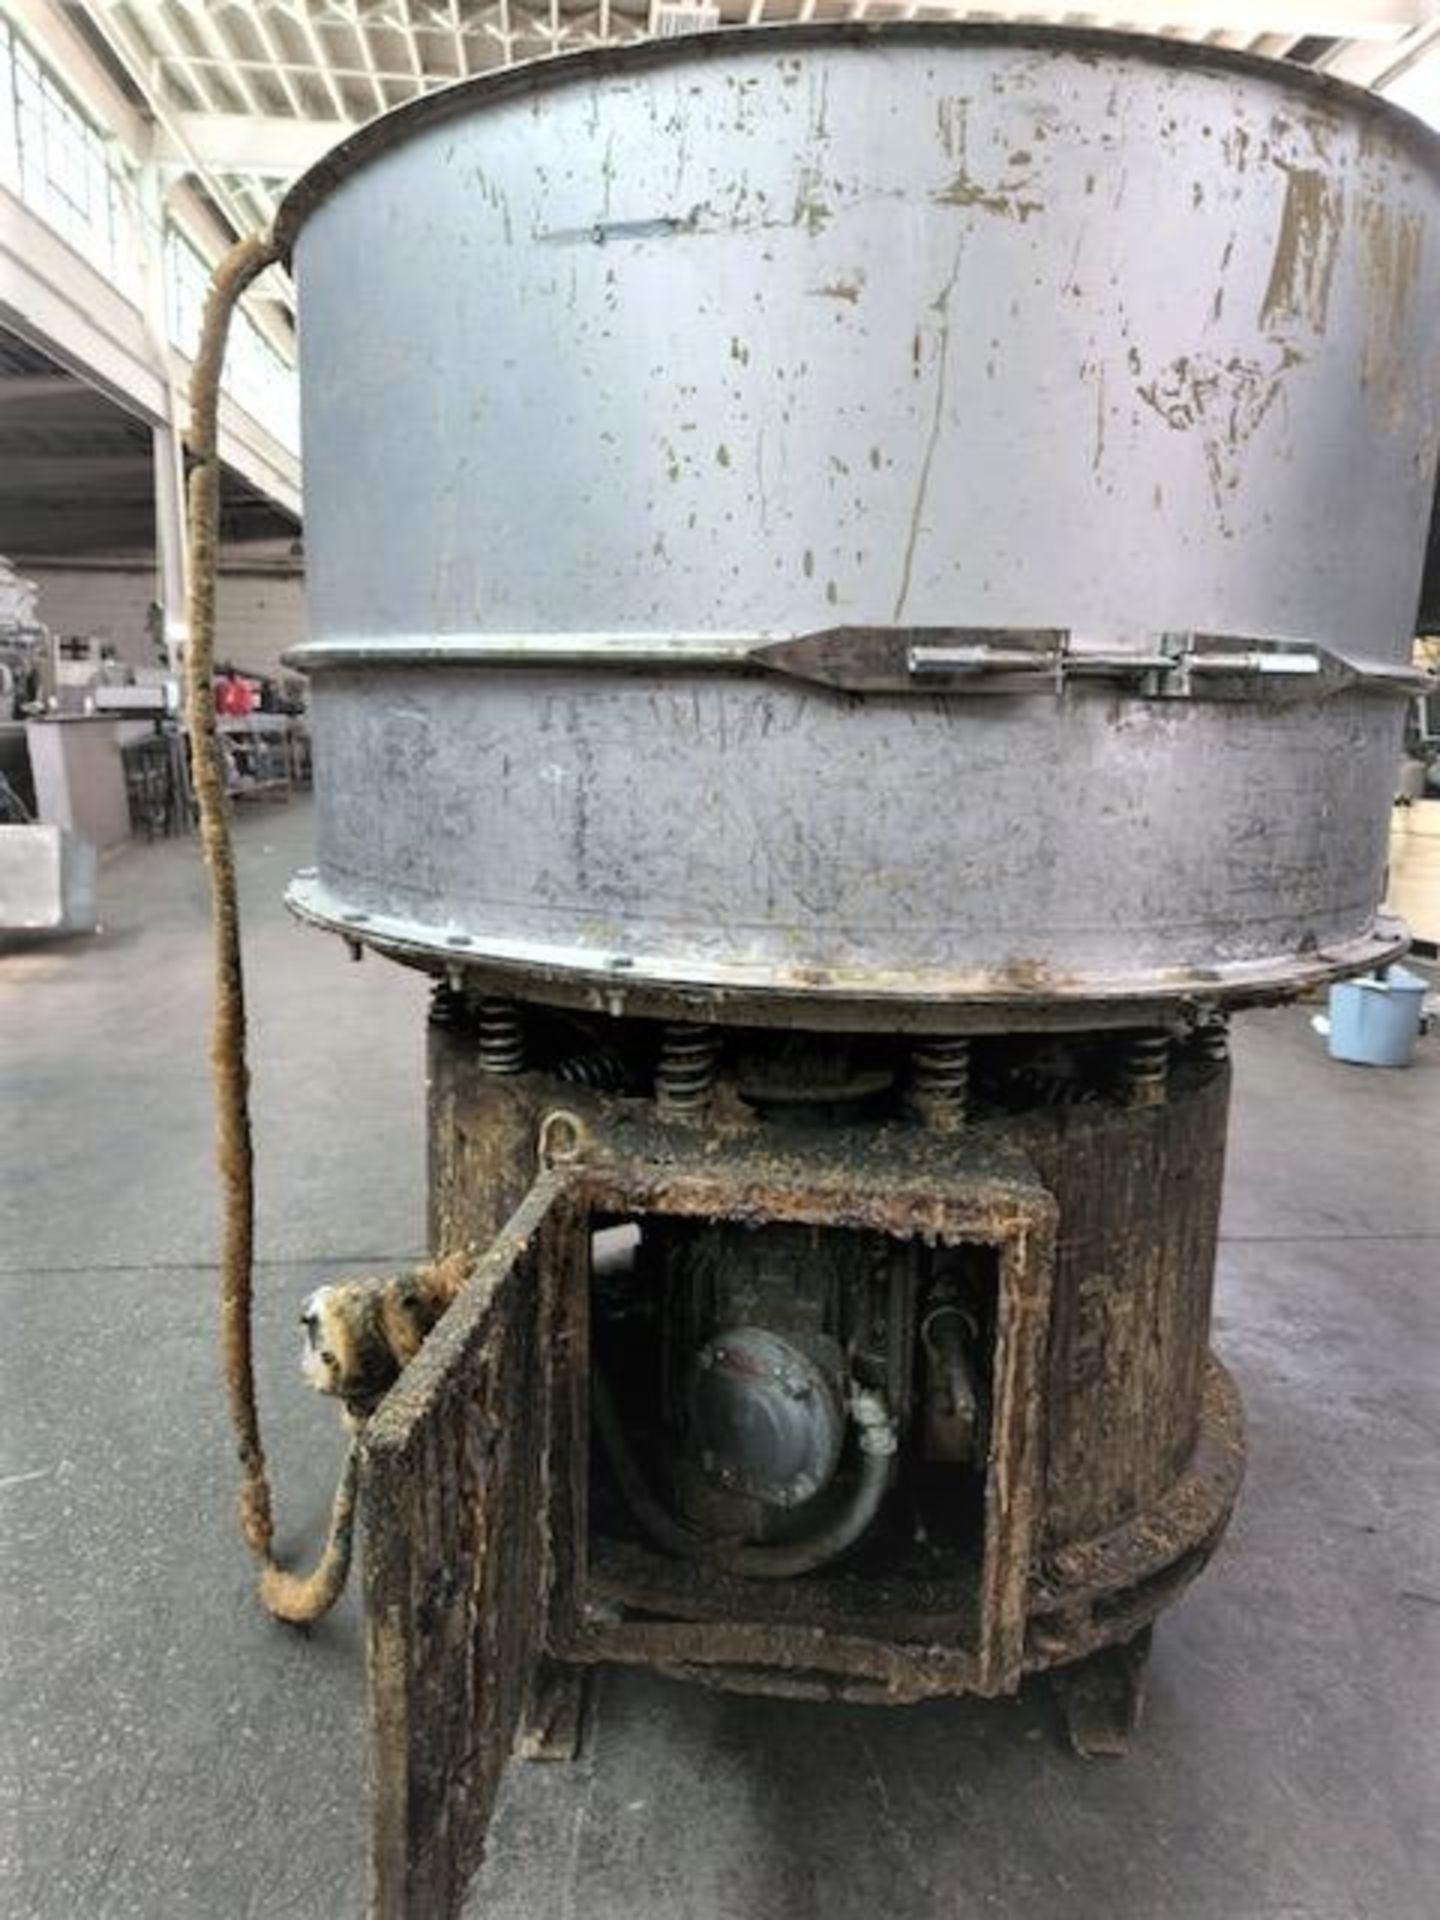 Aprox. 48" S/S Single Deck Vibratory Screener - Unit was last used in the paper industry,  You - Image 3 of 7